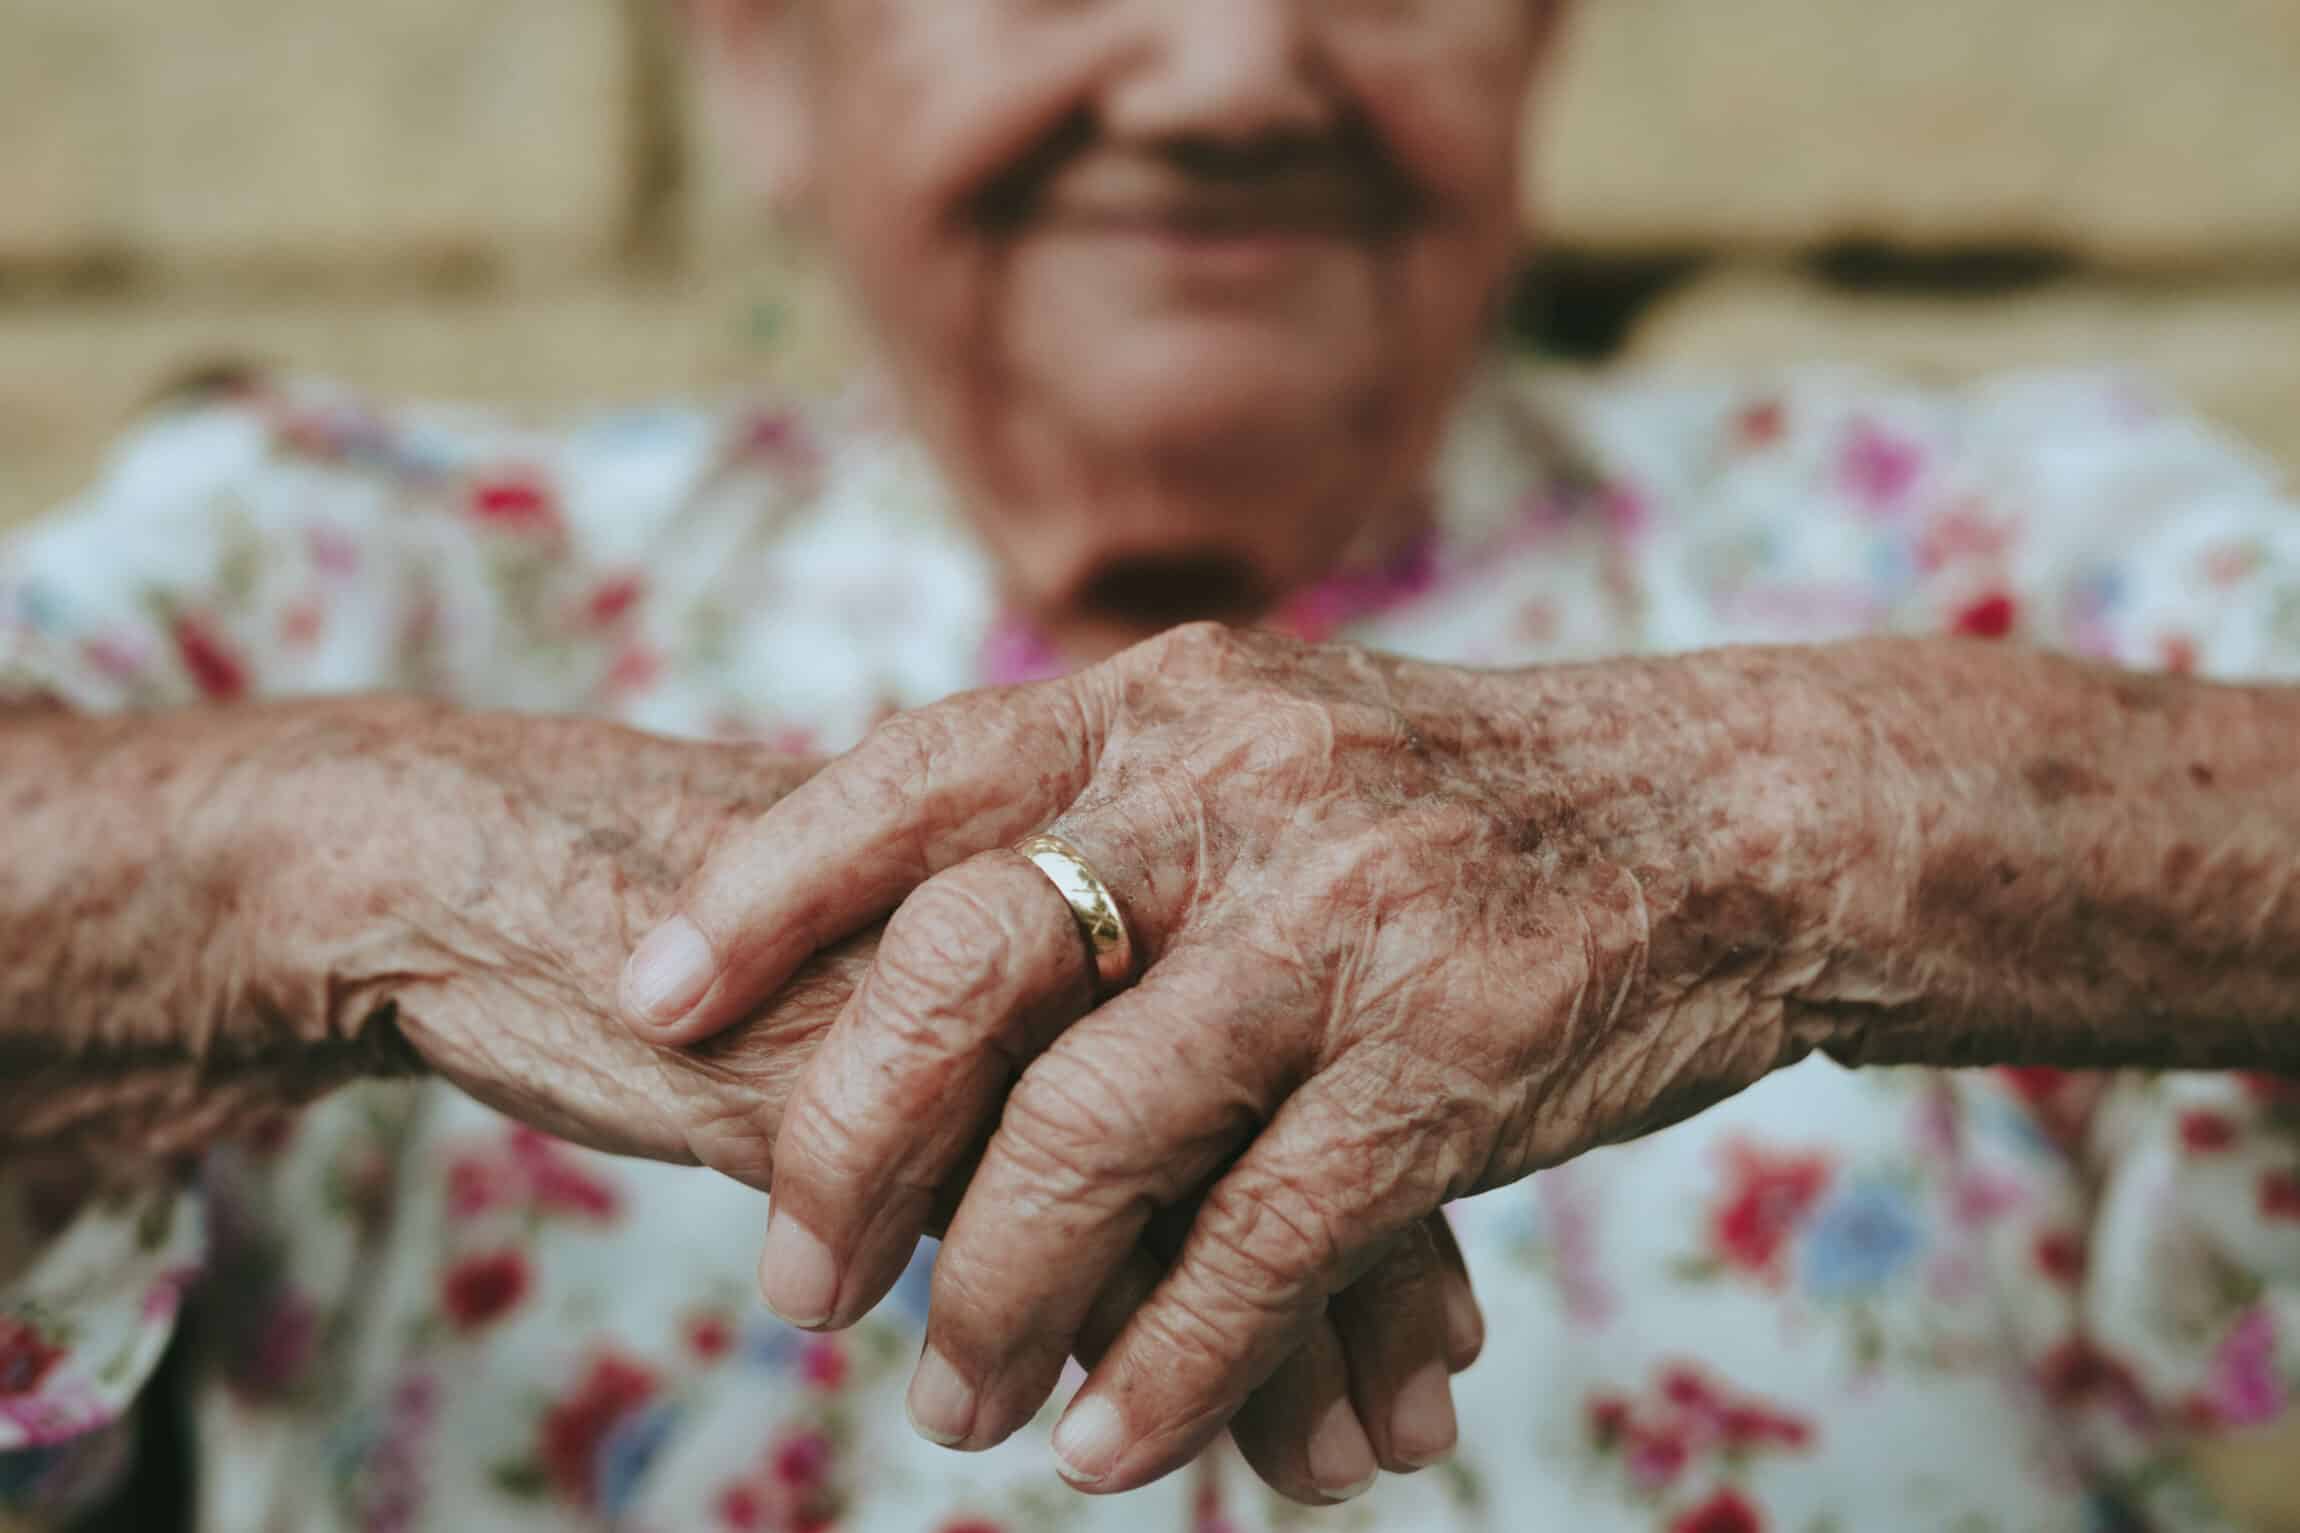 A woman’s wrinkled hands with a golden wedding ring on her middle finger.